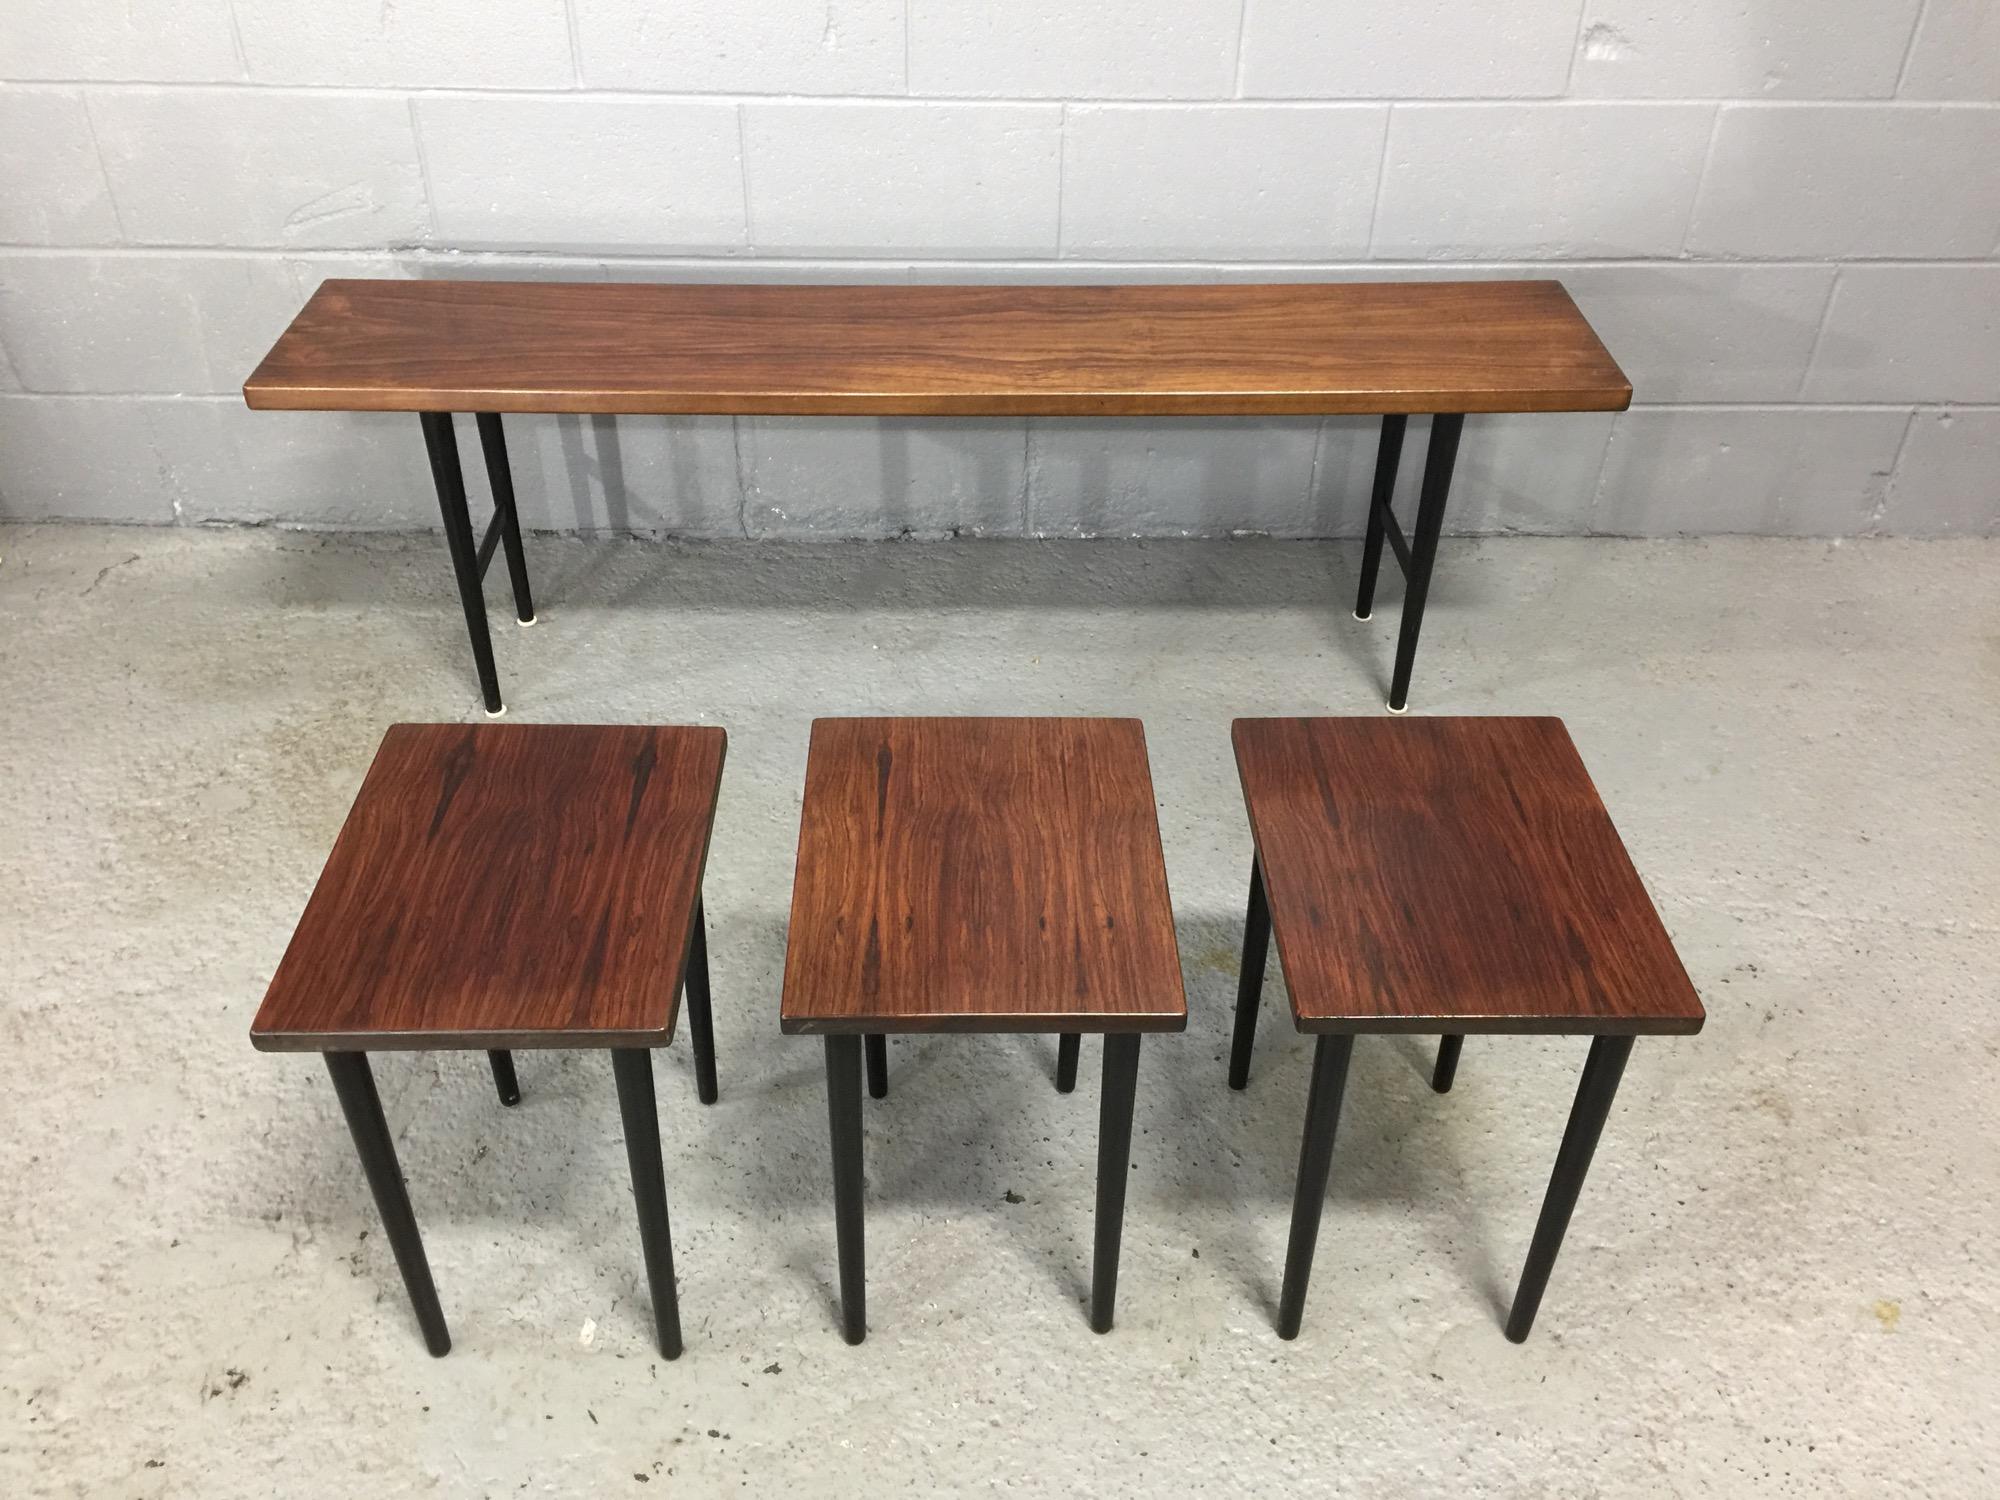 Long Rosewood Table with 3 Small Nesting Tables 4